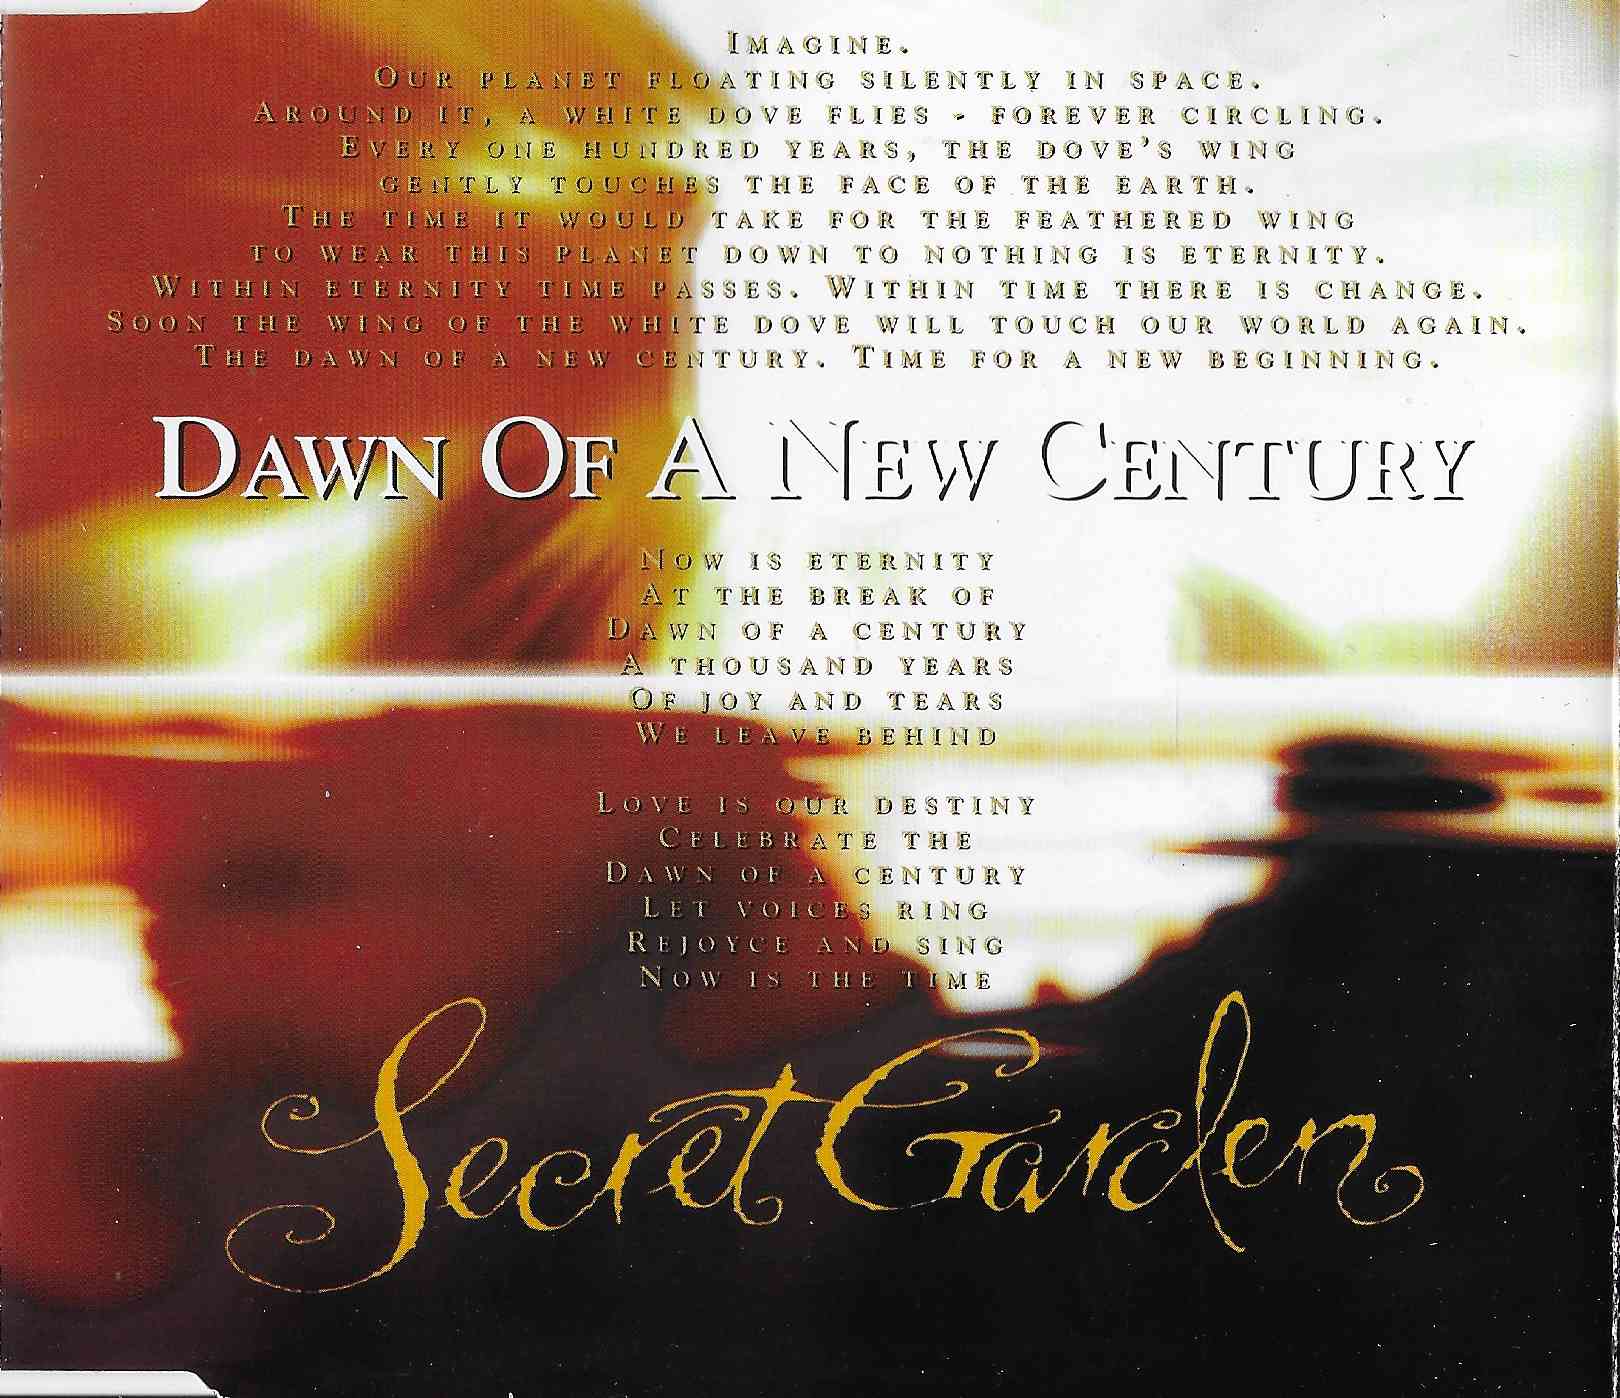 Picture of SGPROMO99-02 Dawn of a new century - Promotional copy by artist Secret Garden 